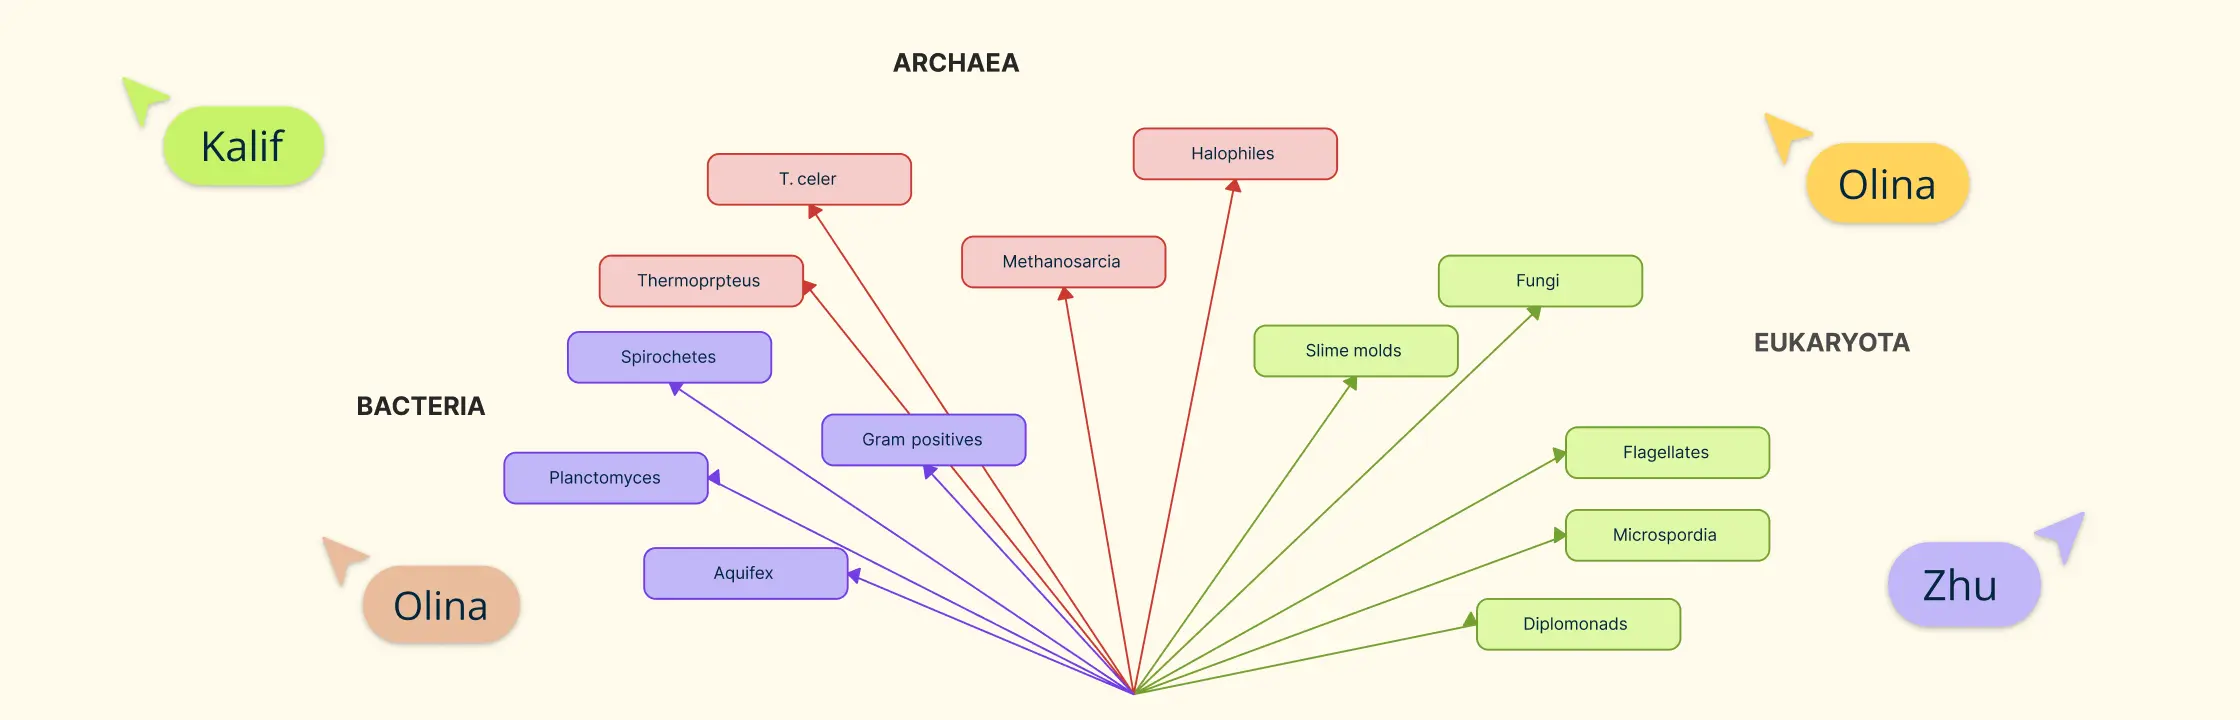 Phylogenetic Trees: Your Guide to Evolutionary Visual Diagrams